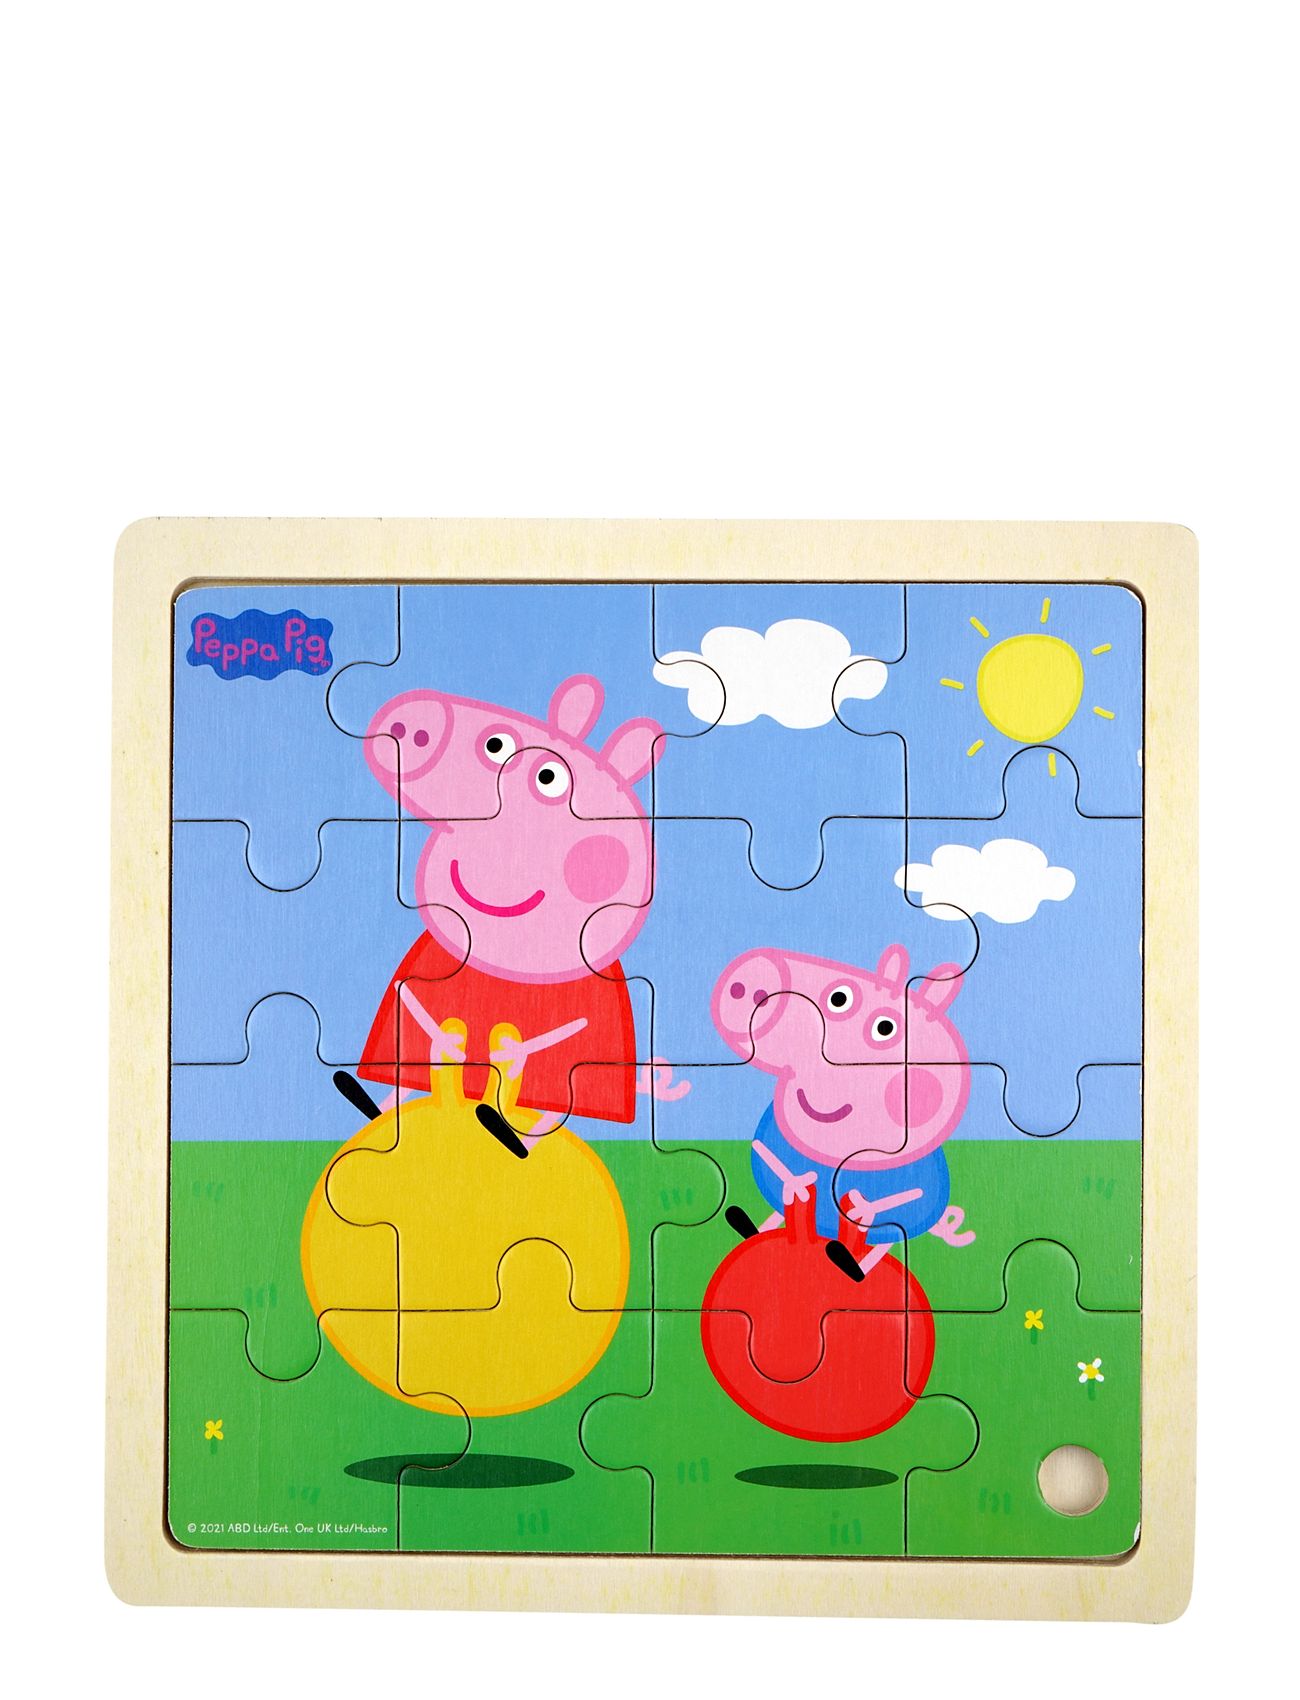 Peppa Pig - Wooden Puzzle – Bouncy Ball Toys Puzzles And Games Puzzles Wooden Puzzles Multi/patterned Barbo Toys